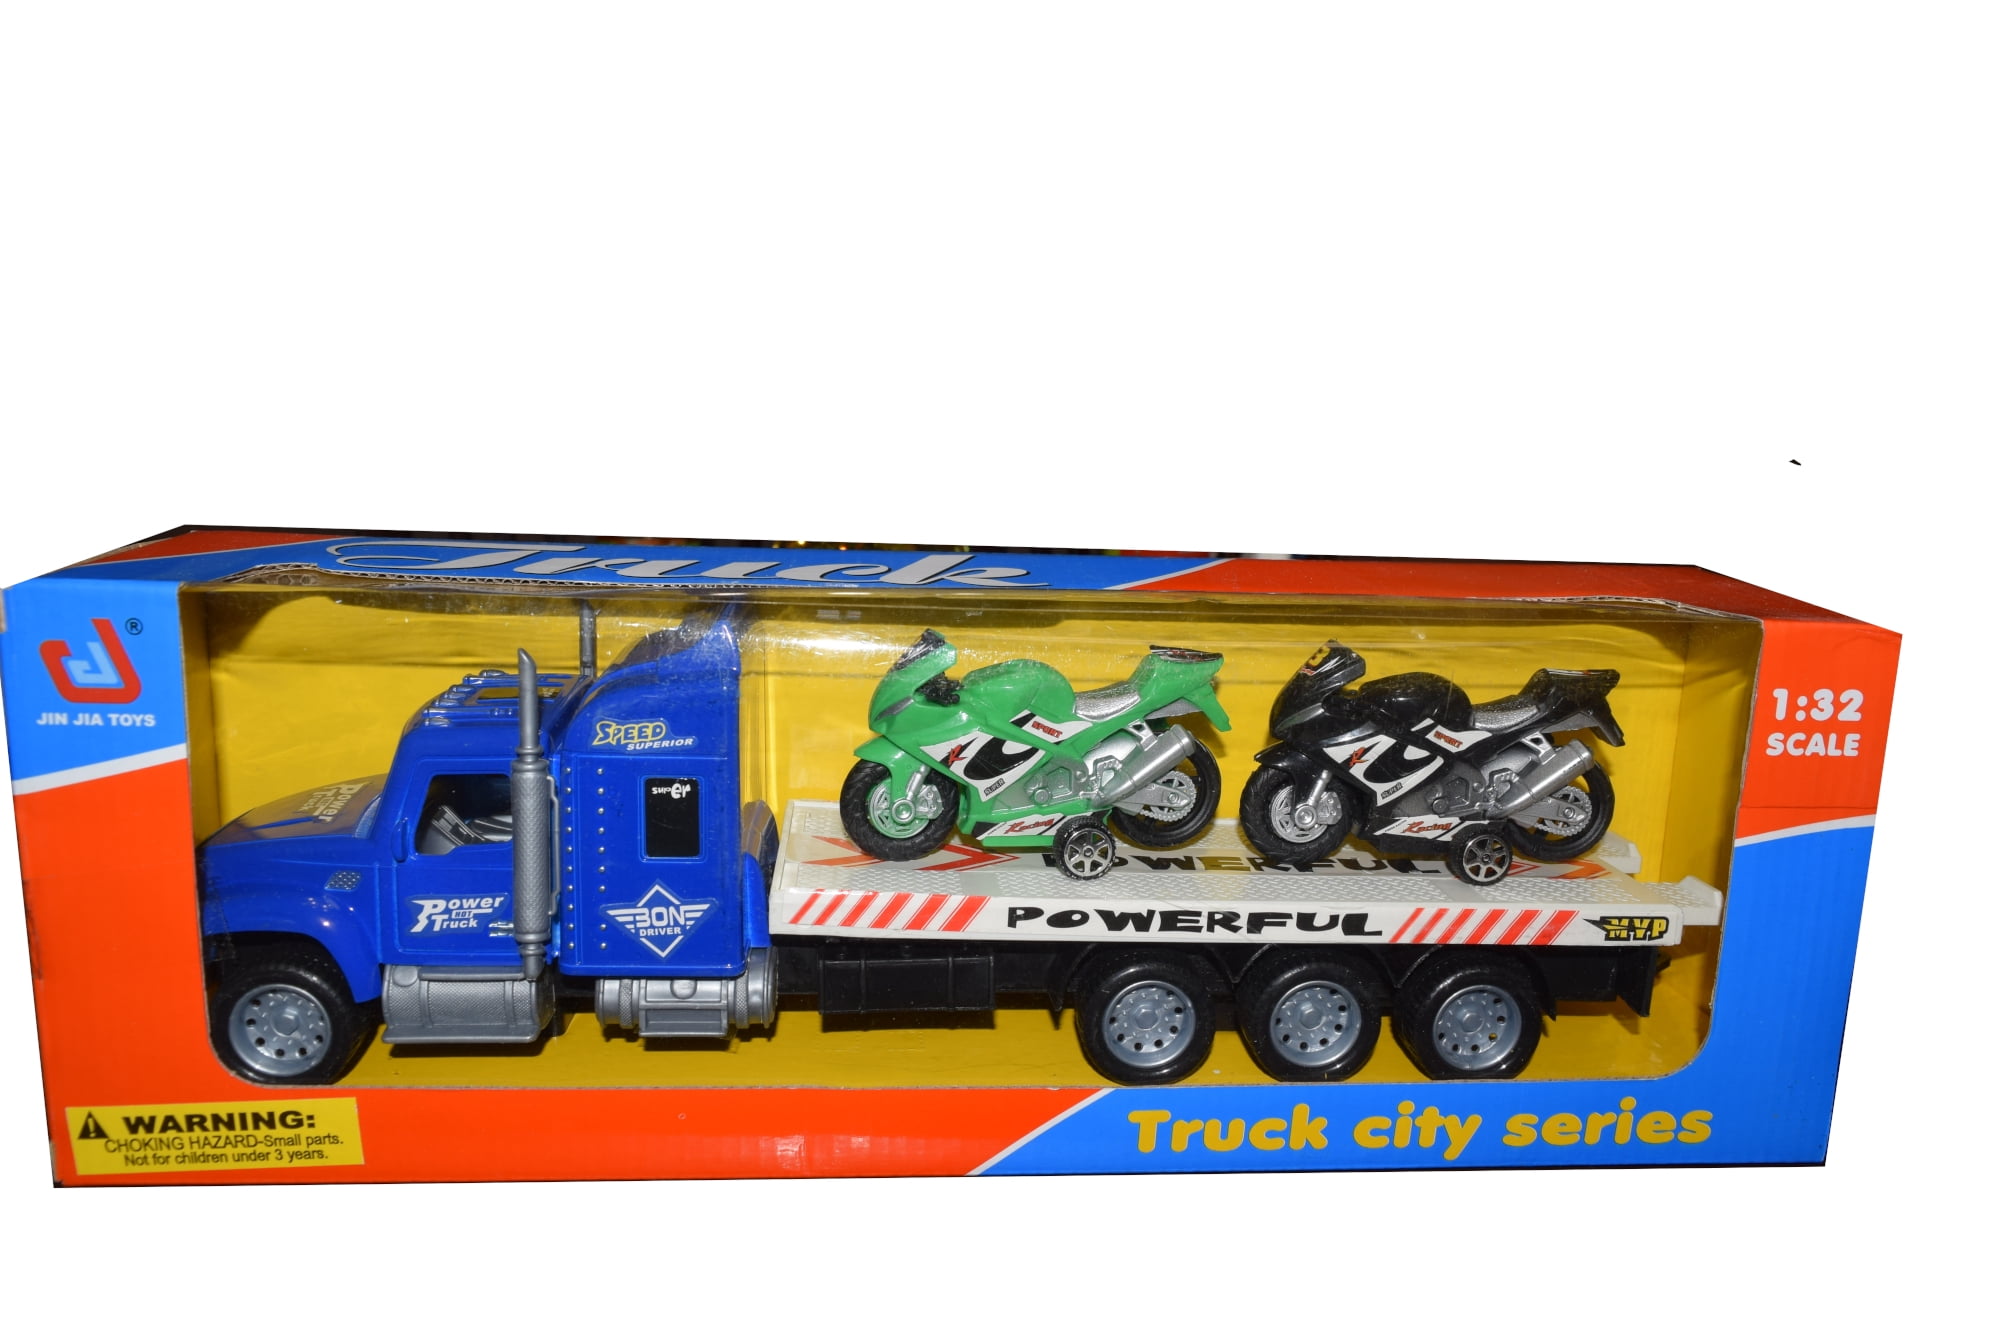 Big Semi Fusion Powered SemiTruck With Motorcycles Set Boys ToyOF4